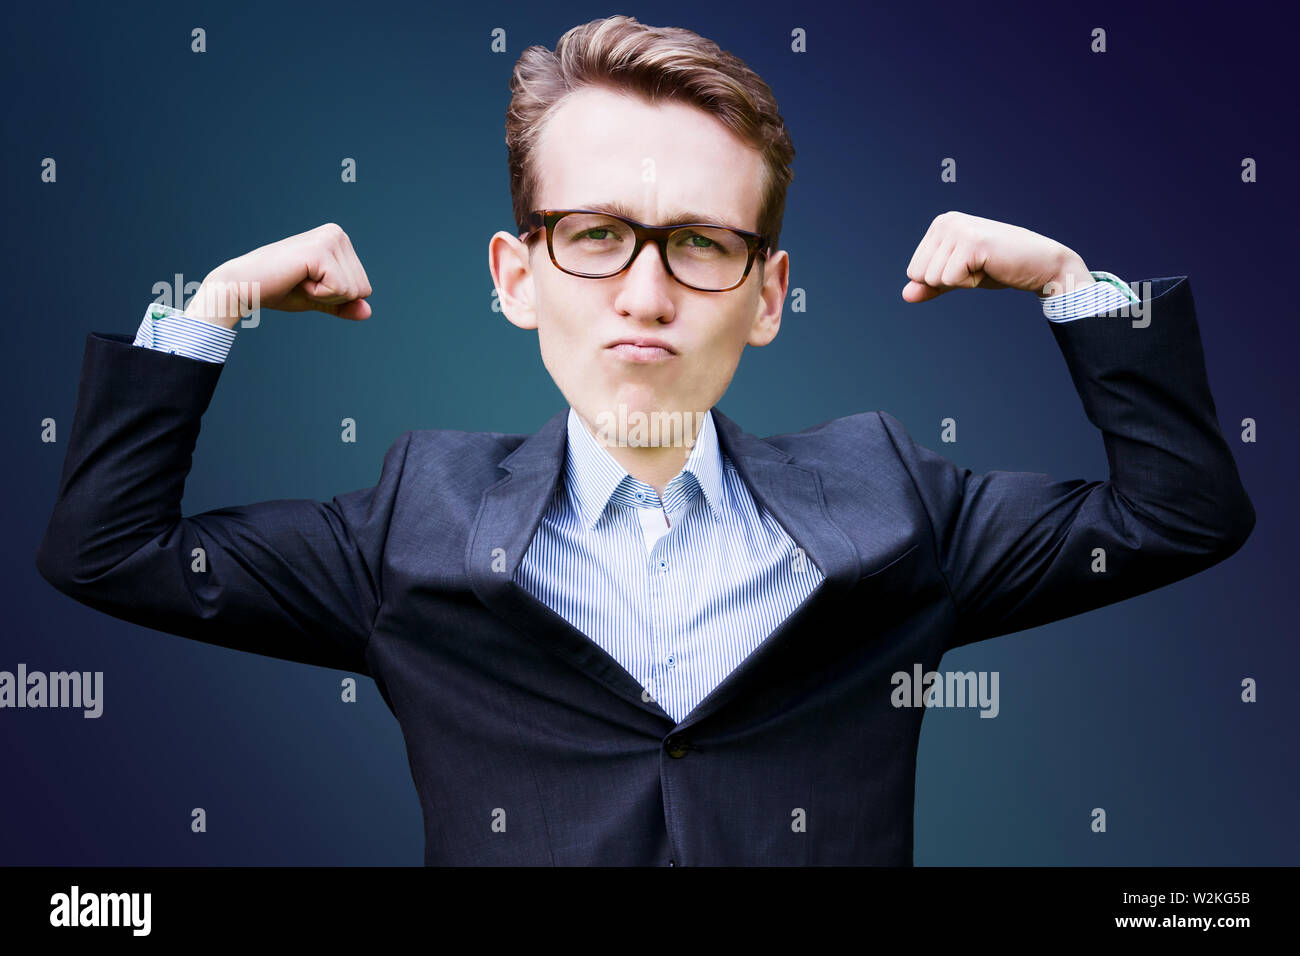 portrait of young man with big head  in suit flexing his muscles Stock Photo